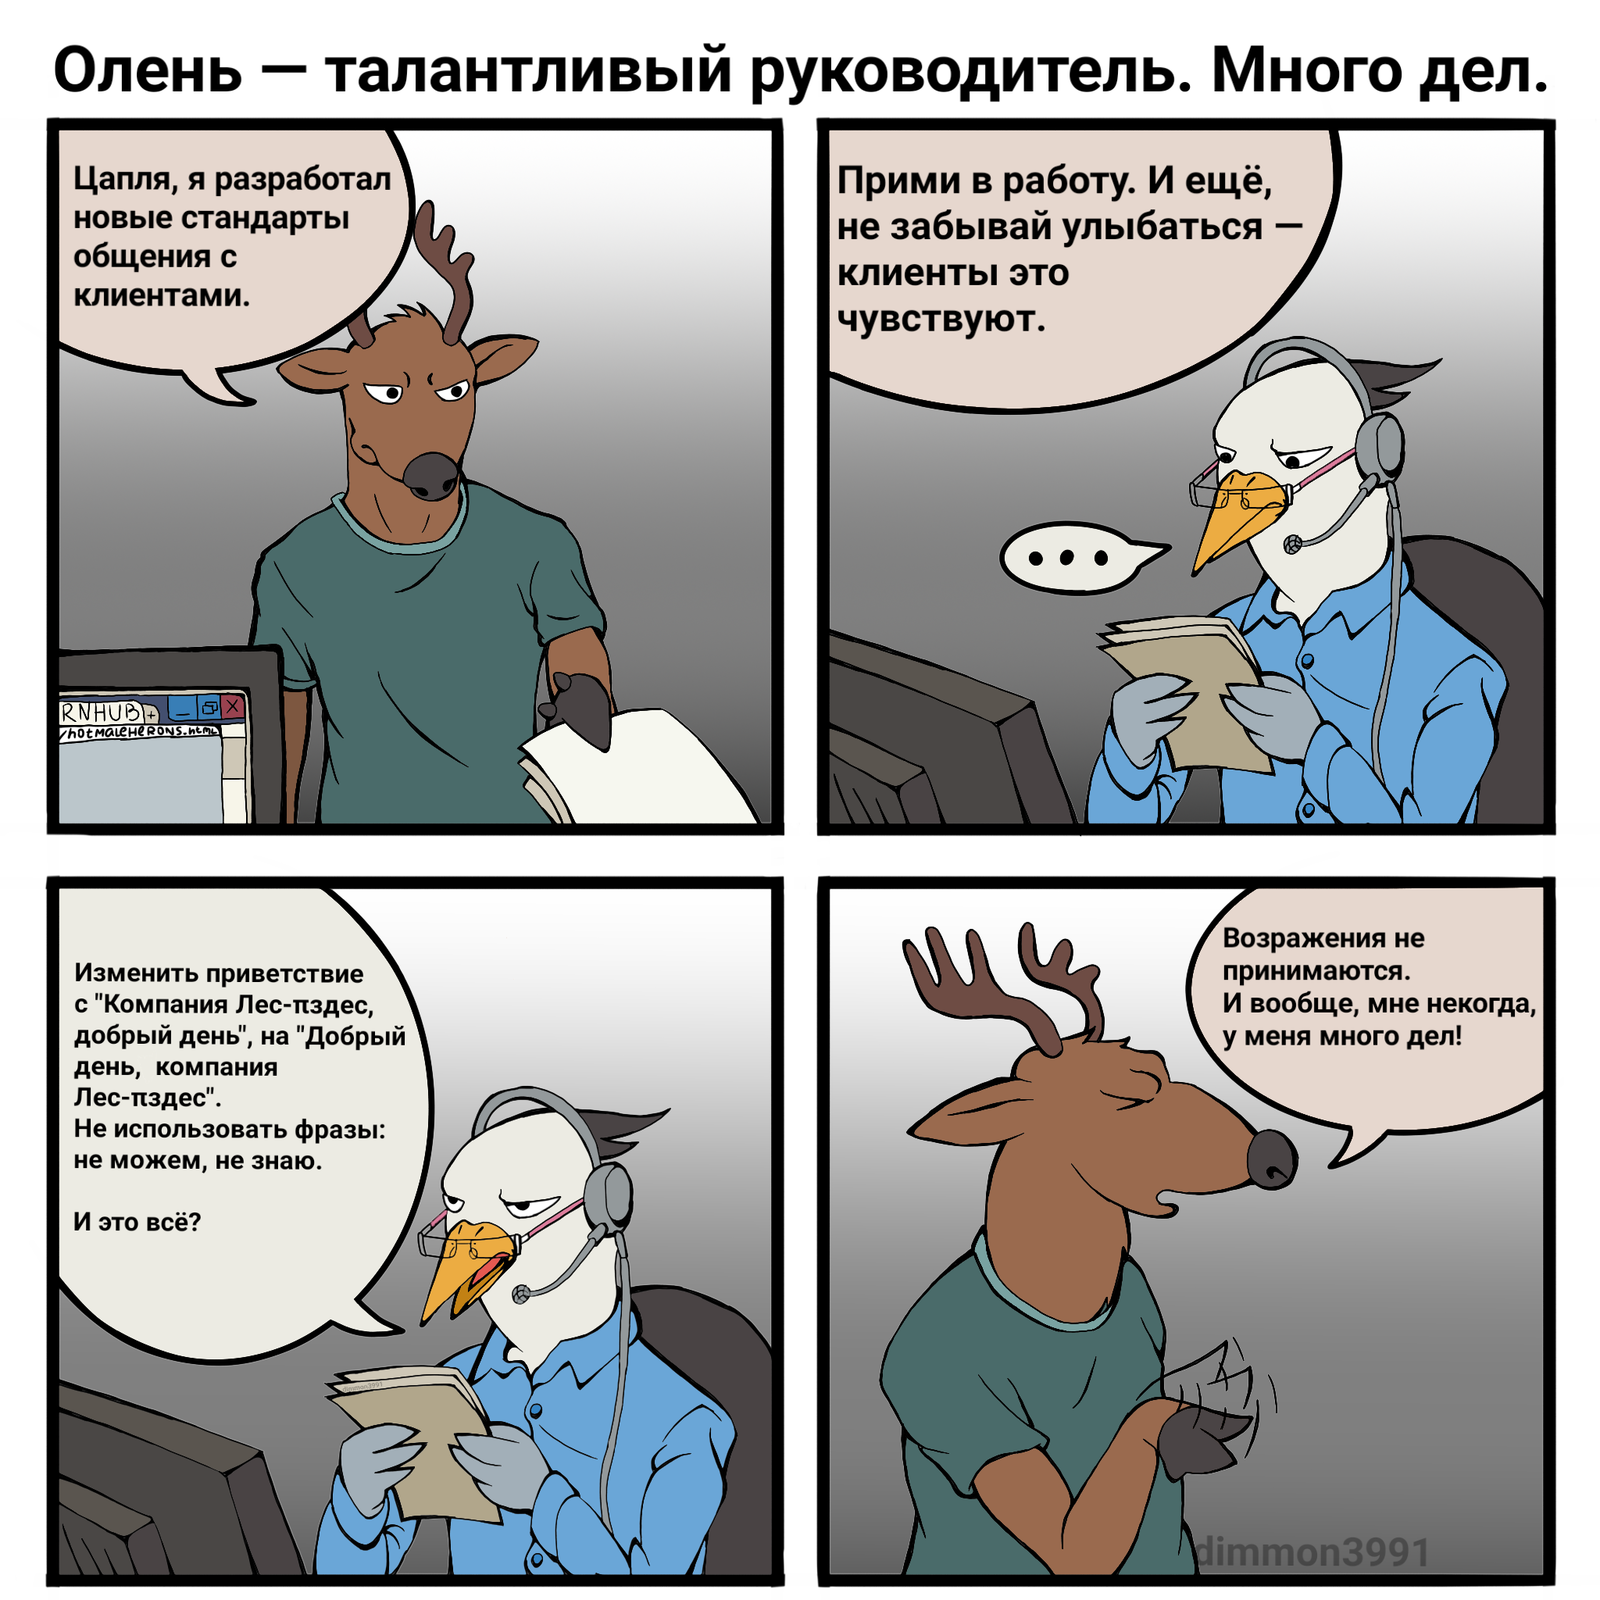 Deer is a talented leader. - My, Fanfiction about the effective owl, Фанфик, Management, Bosses, Call center, Communication, Comics